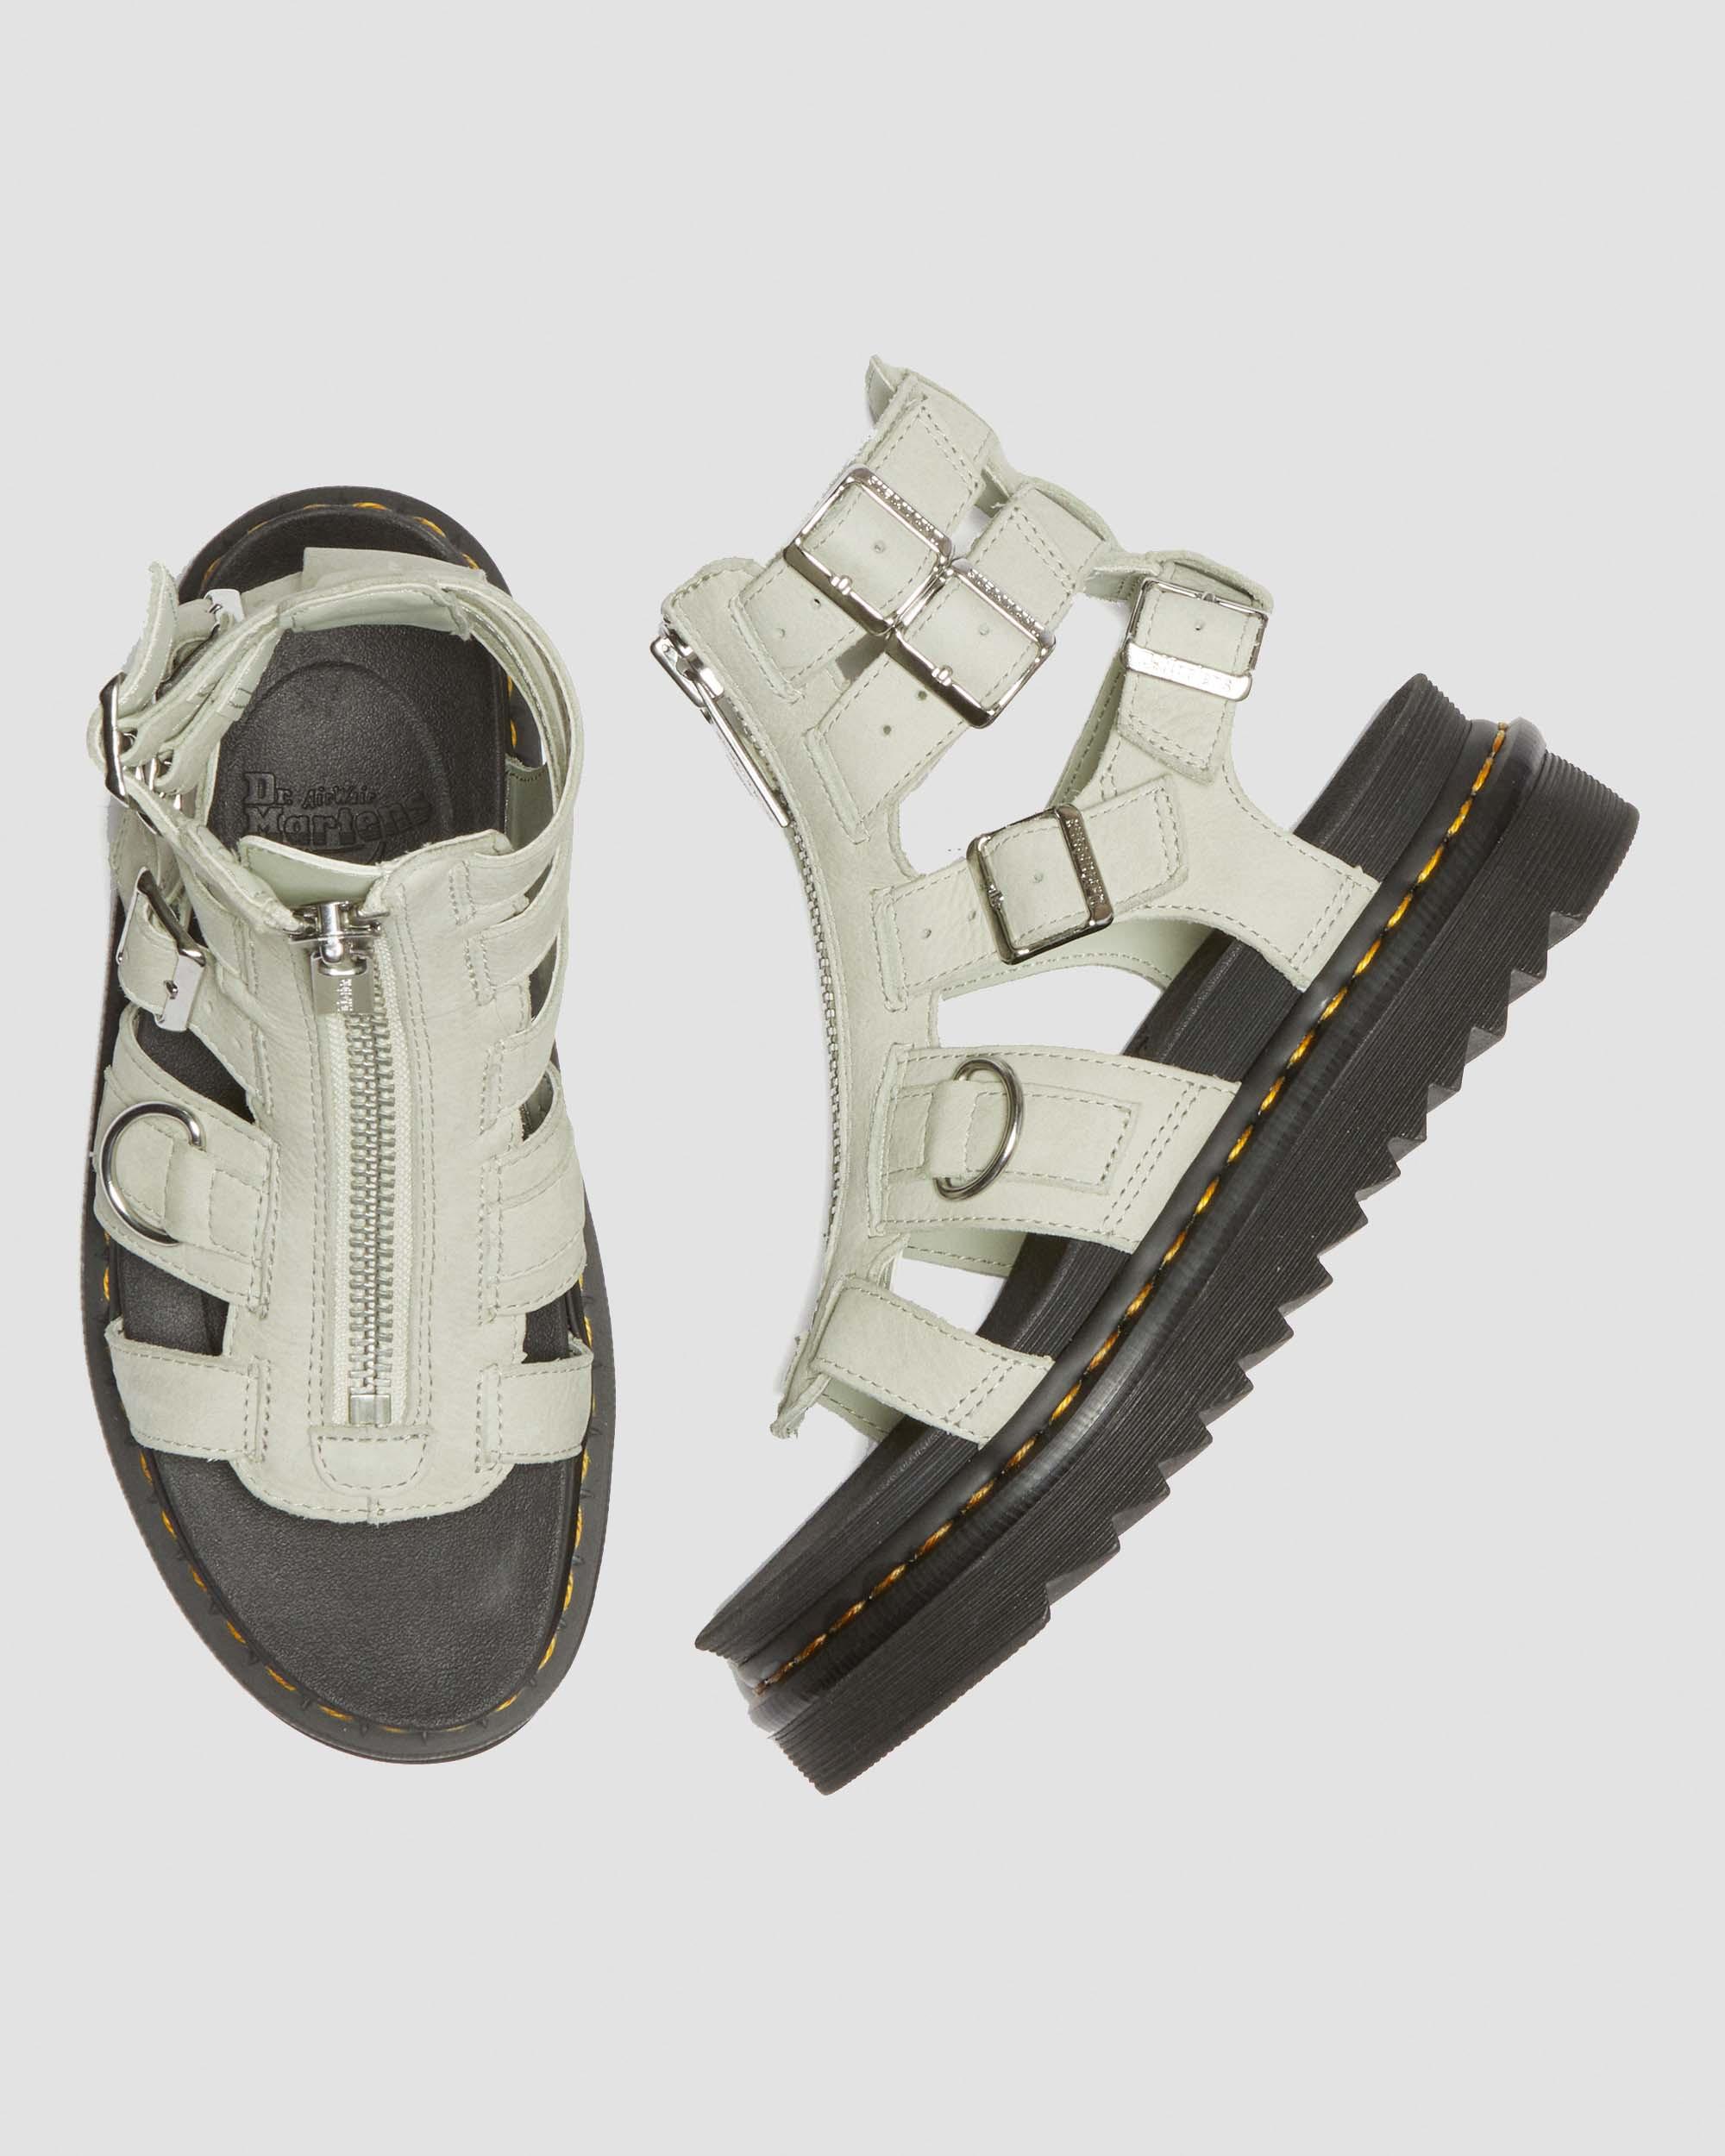 Olson Tumbled Nubuck Leather Gladiator Zip Sandals in Smoked Mint